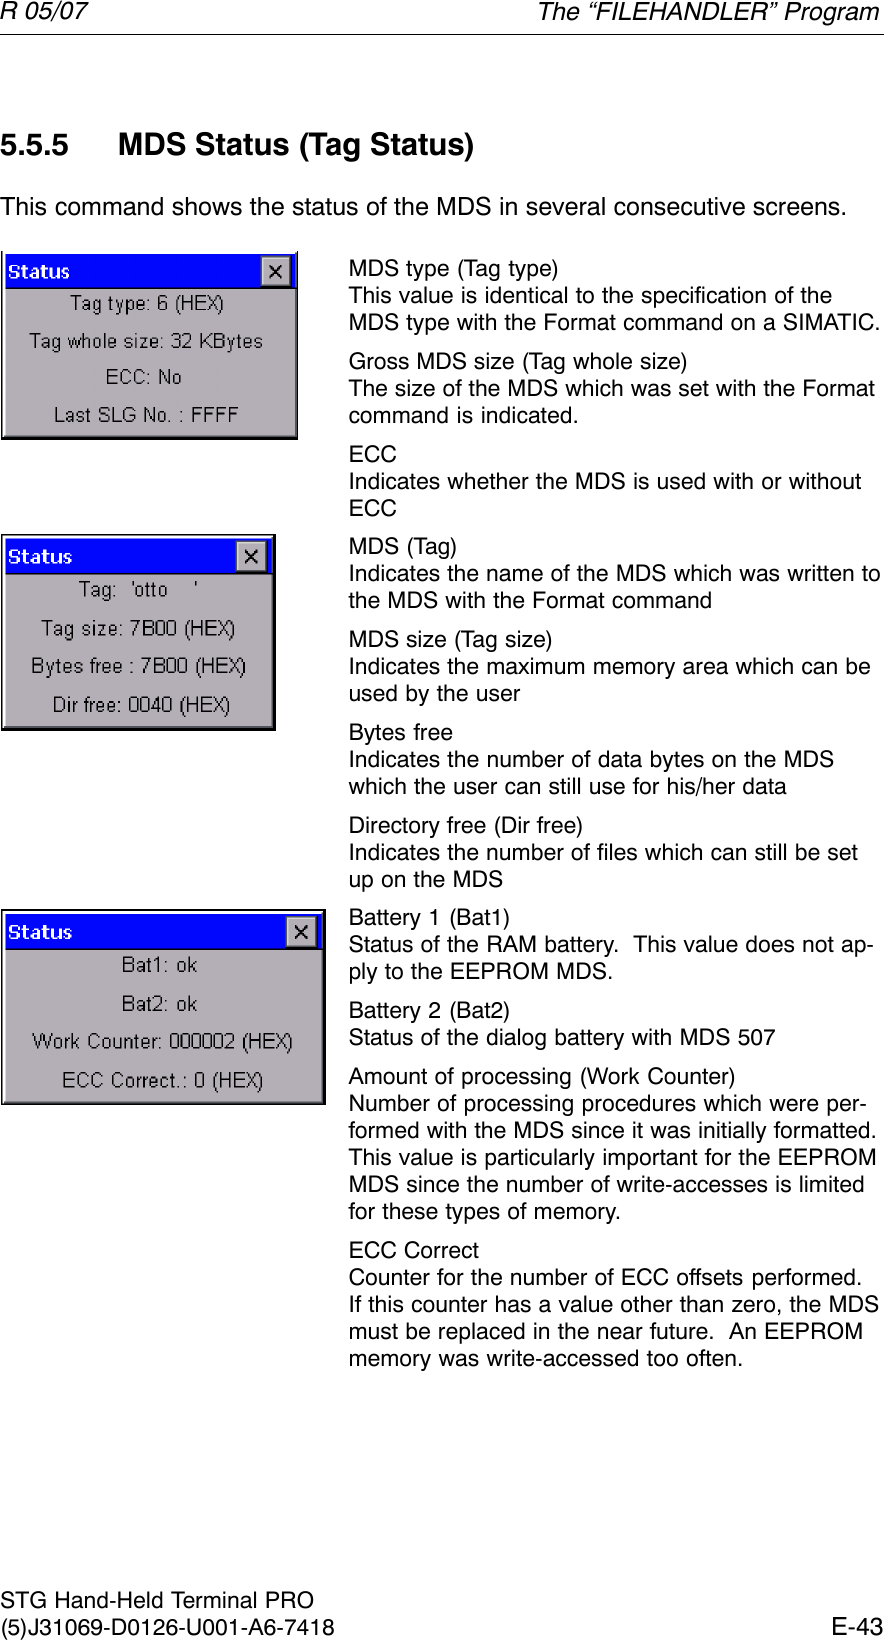 R 05/07E-43STG Hand-Held Terminal PRO(5)J31069-D0126-U001-A6-74185.5.5 MDS Status (Tag Status)This command shows the status of the MDS in several consecutive screens.MDS type (Tag type)This value is identical to the specification of theMDS type with the Format command on a SIMATIC.Gross MDS size (Tag whole size)The size of the MDS which was set with the Formatcommand is indicated.ECCIndicates whether the MDS is used with or withoutECCMDS (Tag)Indicates the name of the MDS which was written tothe MDS with the Format commandMDS size (Tag size)Indicates the maximum memory area which can beused by the userBytes freeIndicates the number of data bytes on the MDSwhich the user can still use for his/her dataDirectory free (Dir free)Indicates the number of files which can still be setup on the MDSBattery 1 (Bat1)Status of the RAM battery.  This value does not ap-ply to the EEPROM MDS.Battery 2 (Bat2)Status of the dialog battery with MDS 507Amount of processing (Work Counter)Number of processing procedures which were per-formed with the MDS since it was initially formatted.This value is particularly important for the EEPROMMDS since the number of write-accesses is limitedfor these types of memory.ECC CorrectCounter for the number of ECC offsets performed.If this counter has a value other than zero, the MDSmust be replaced in the near future.  An EEPROMmemory was write-accessed too often.The “FILEHANDLER” Program